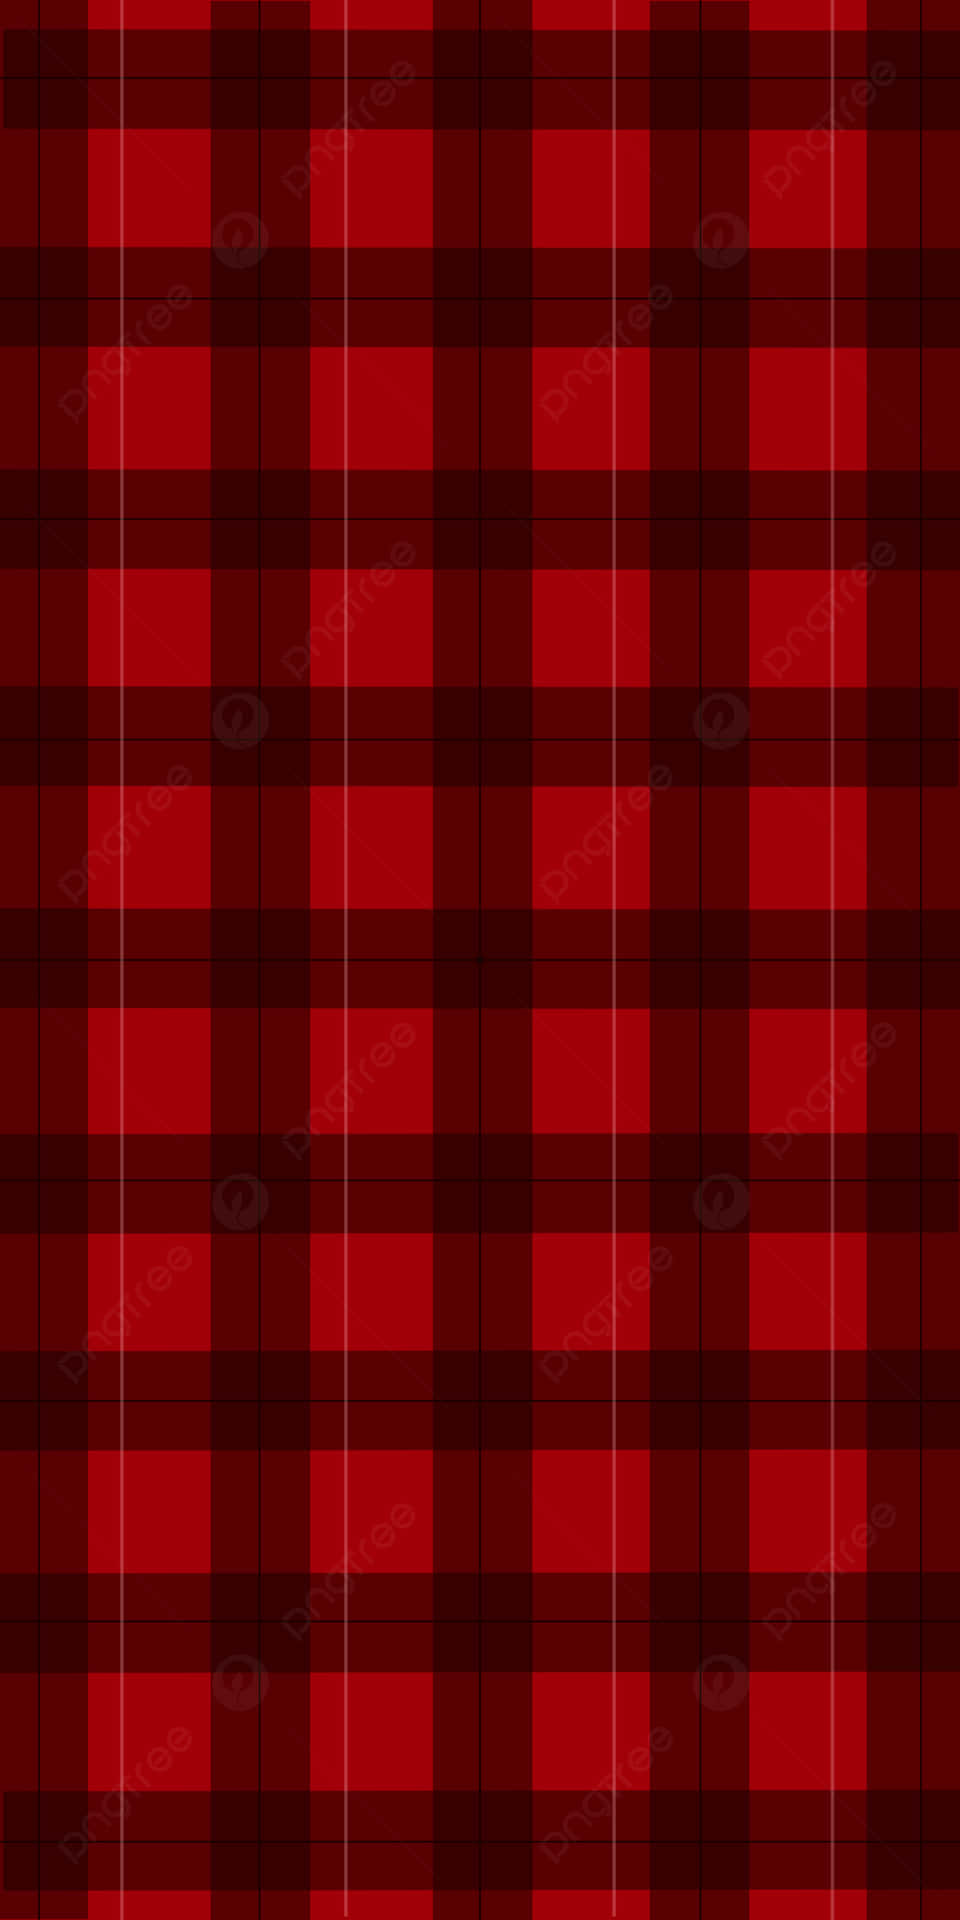 Get in the Groove with Red Checkered Wallpaper